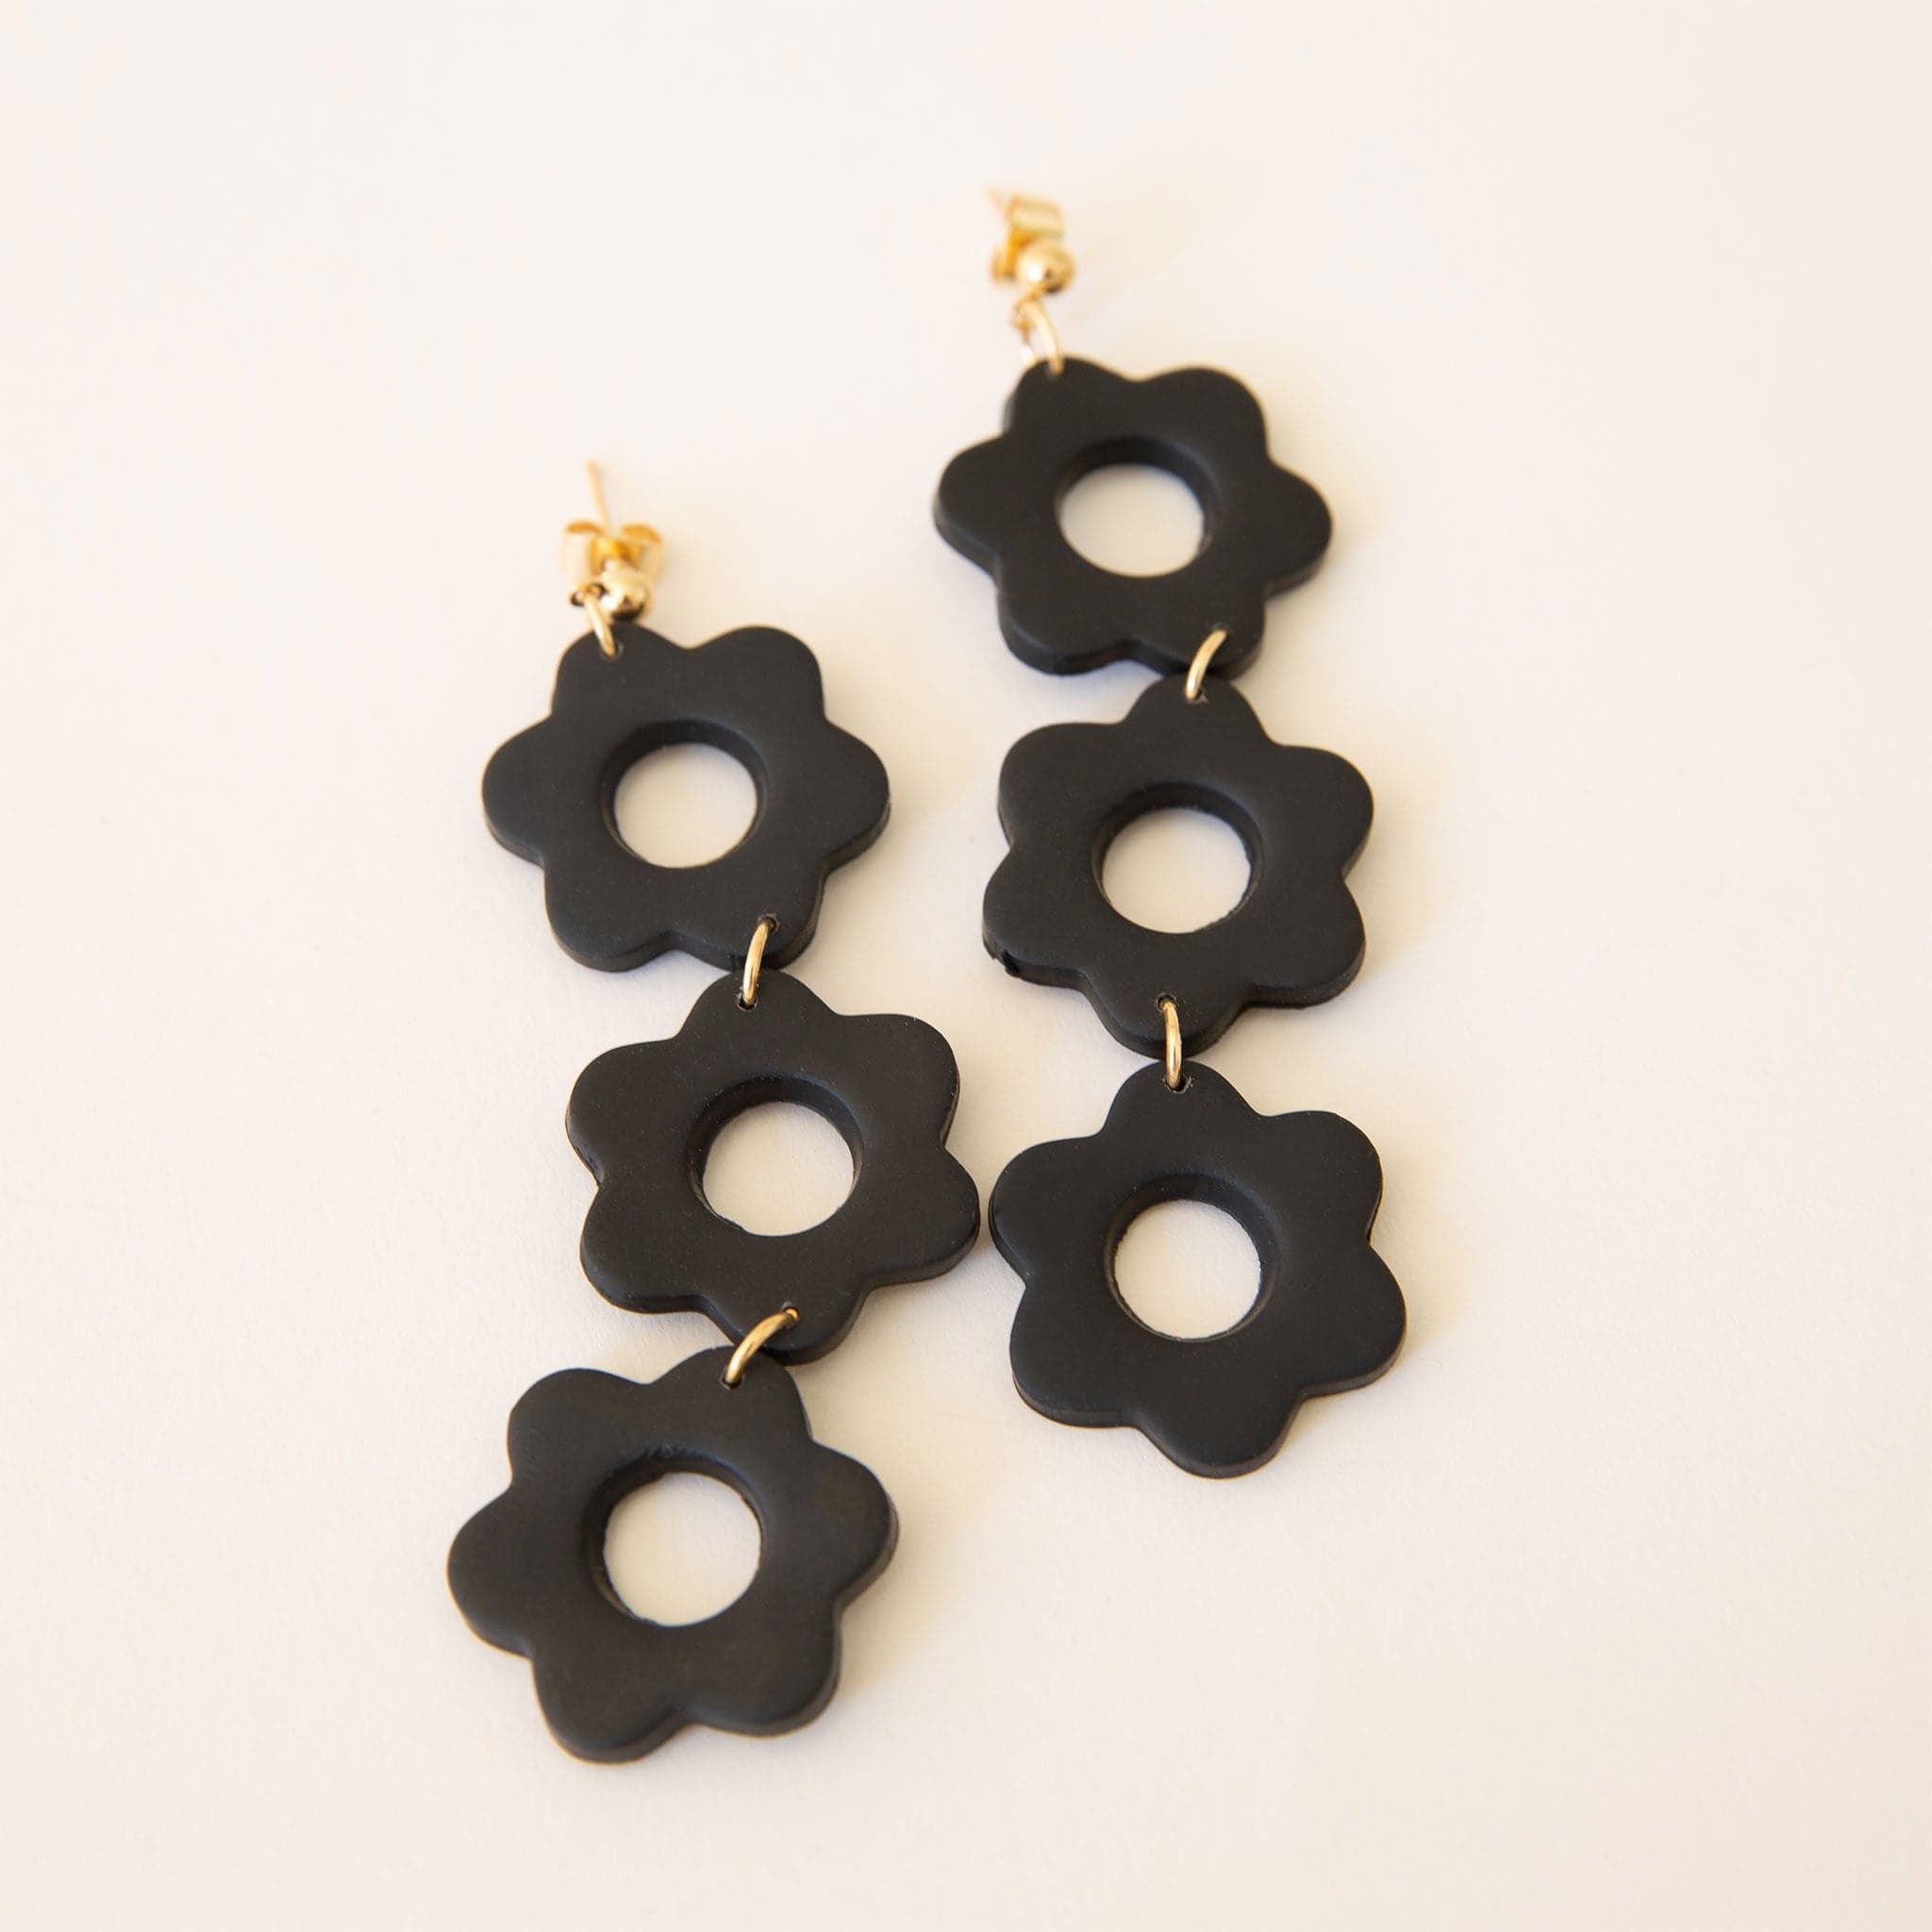 Pair of two earrings with three dangling black flowers made of black polymer clay. The flowers are bound together in a row with small gold hoops.  